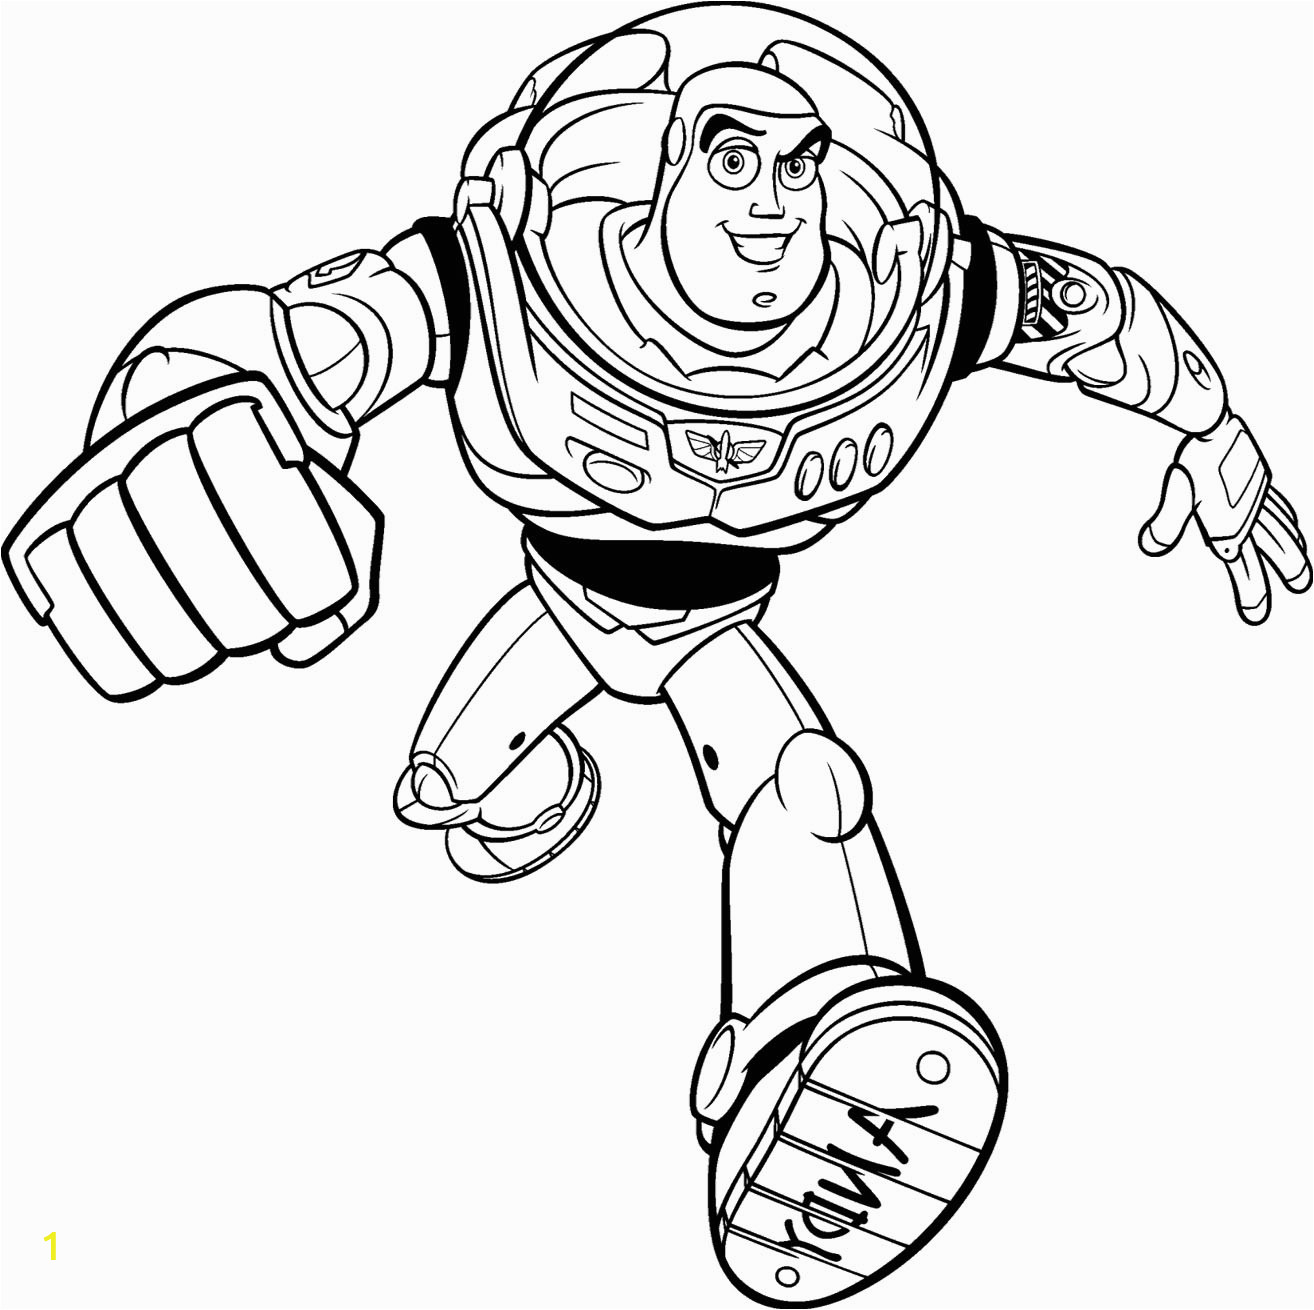 Buzz Woody Coloring Pages toy Story to Print and Colour – Pusat Hobi